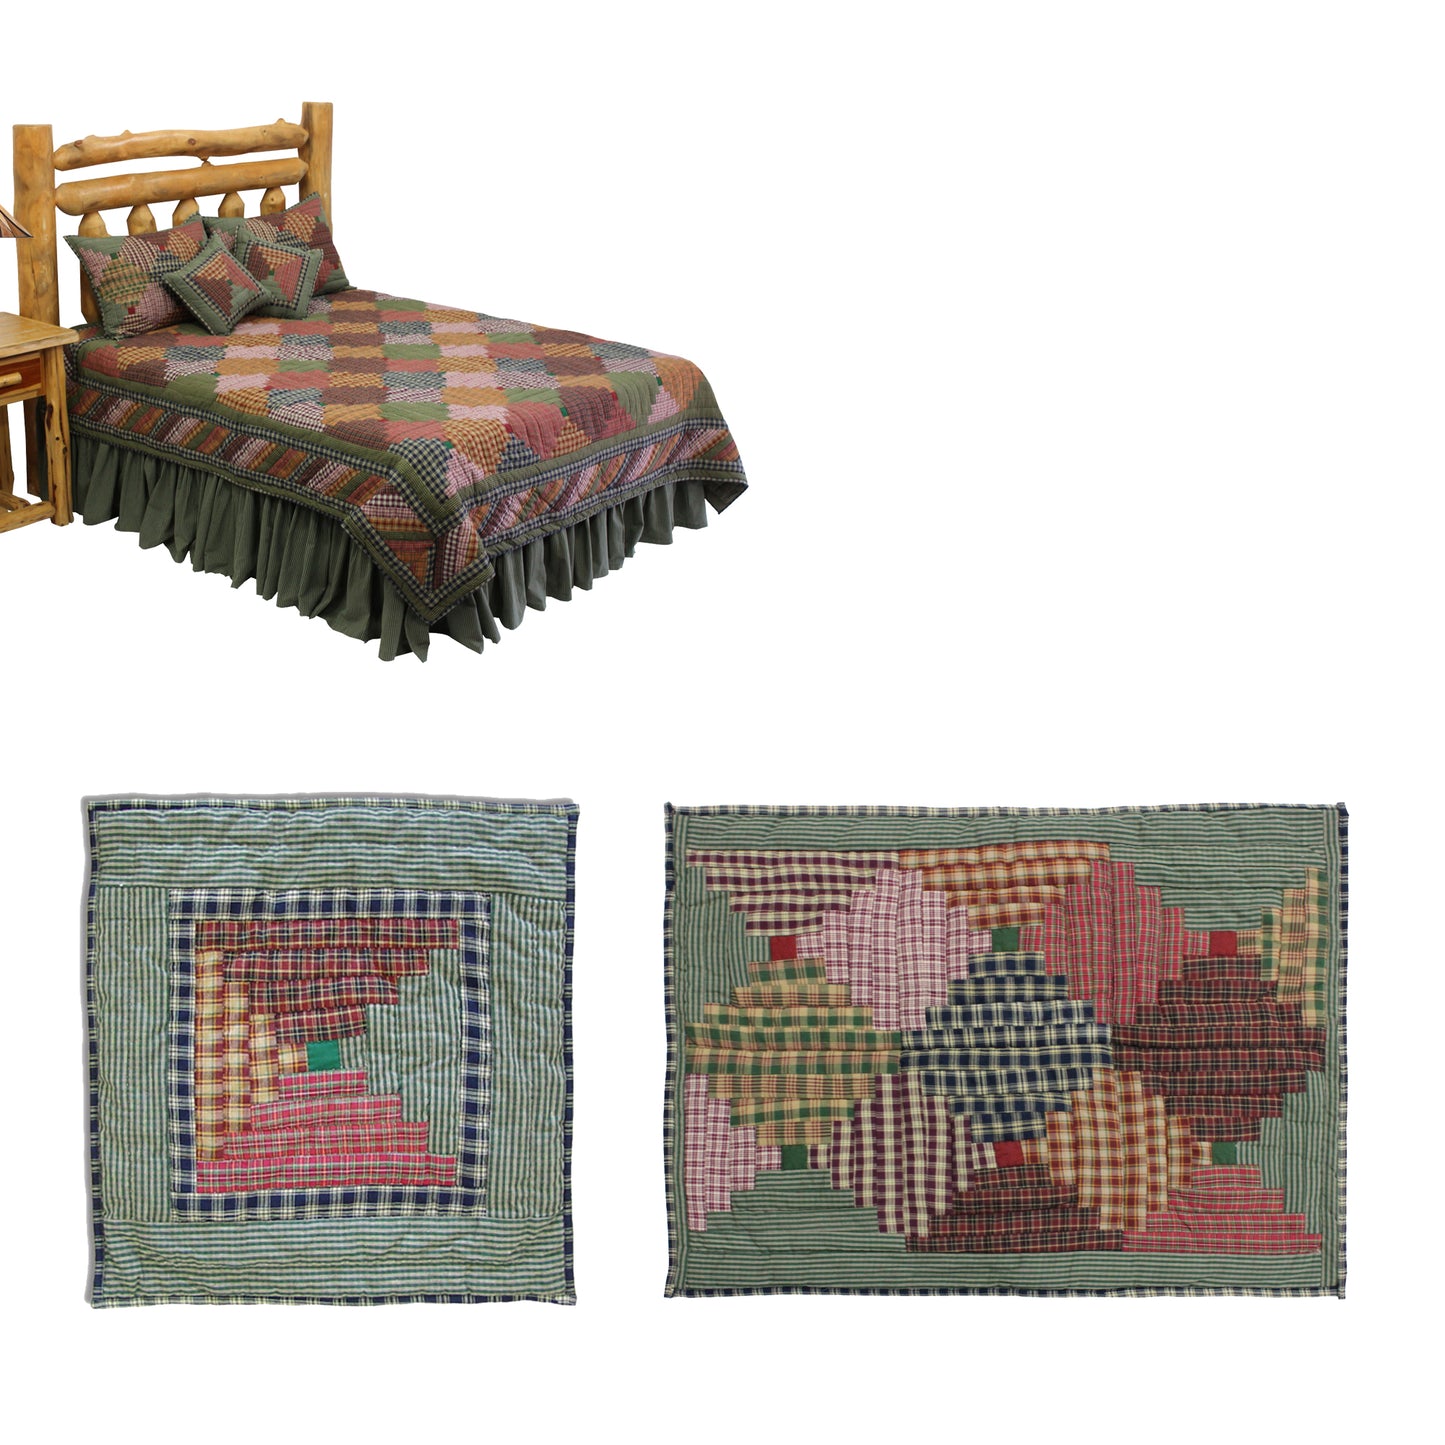 Pastures and Paths Bedding accessories and Ensemble sets.